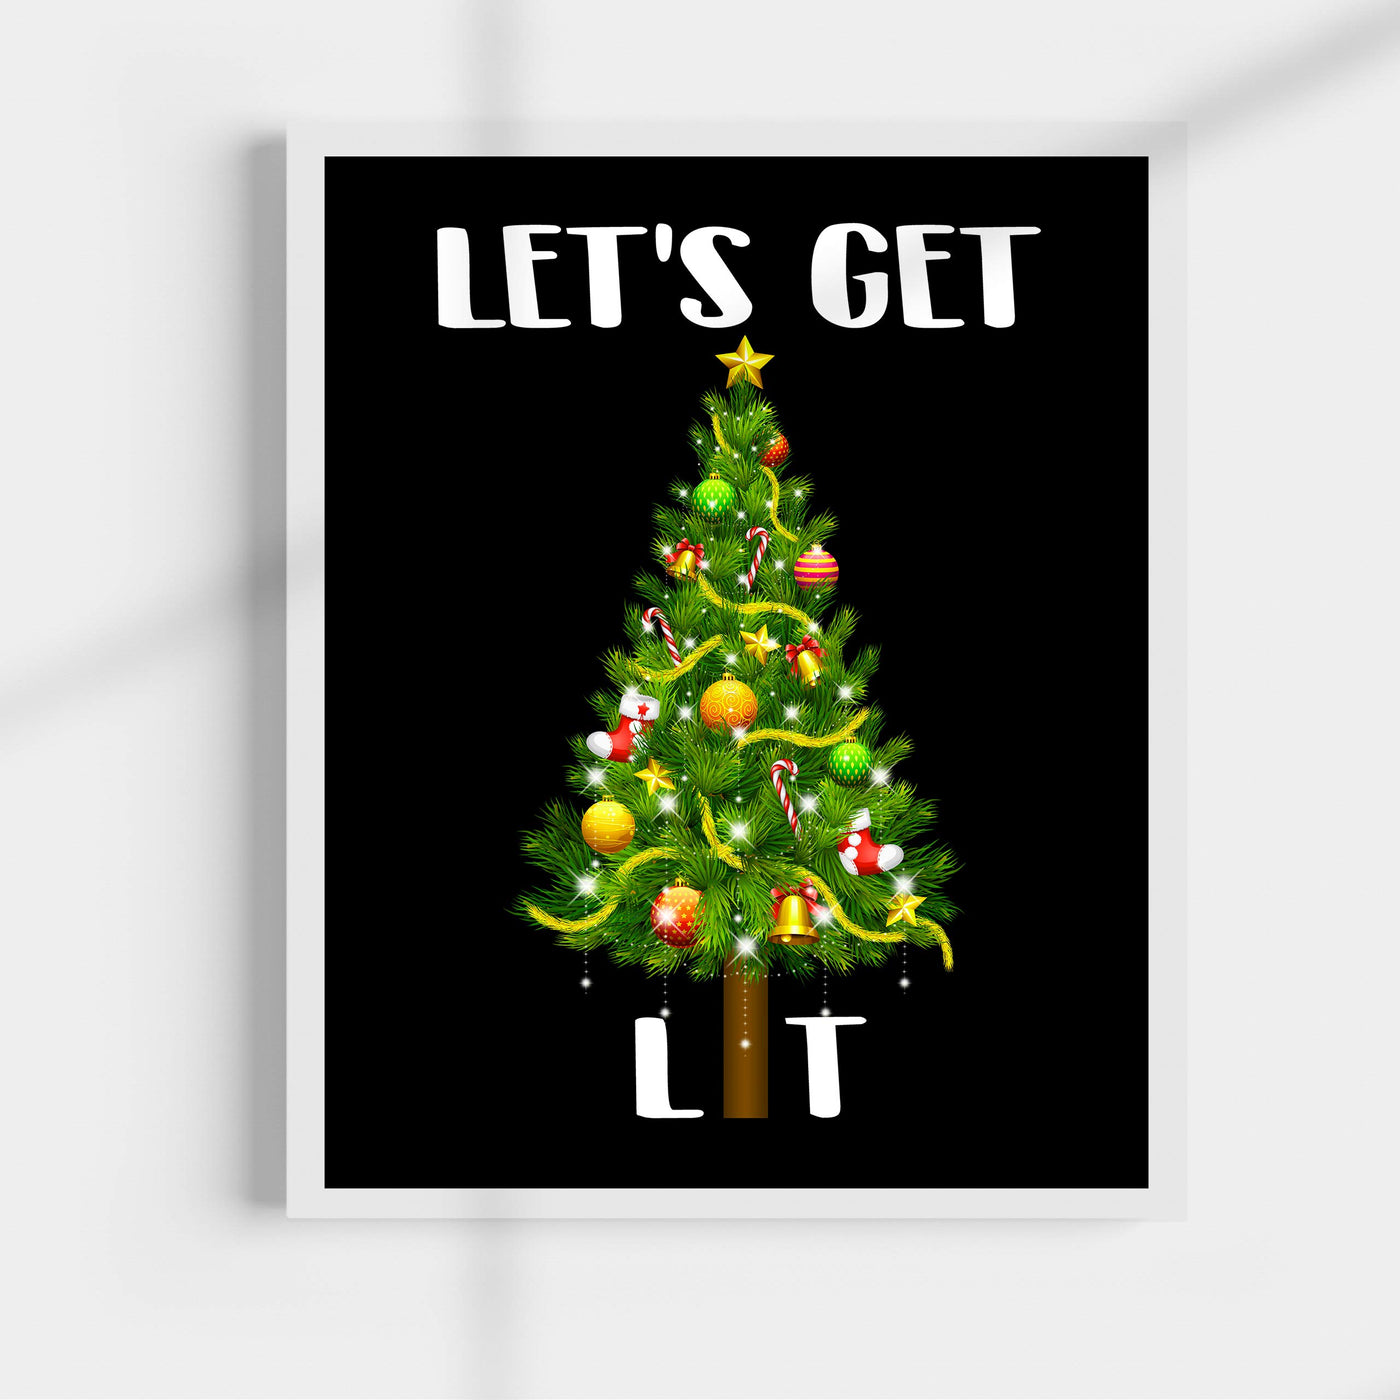 Let's Get Lit Funny Christmas Tree Sign -11 x 14" Rustic Holiday Wall Art Print -Ready to Frame. Humorous Decor for Home-Office-Farmhouse-Welcome Decor. Fun Christmas Decoration and Great Gift!